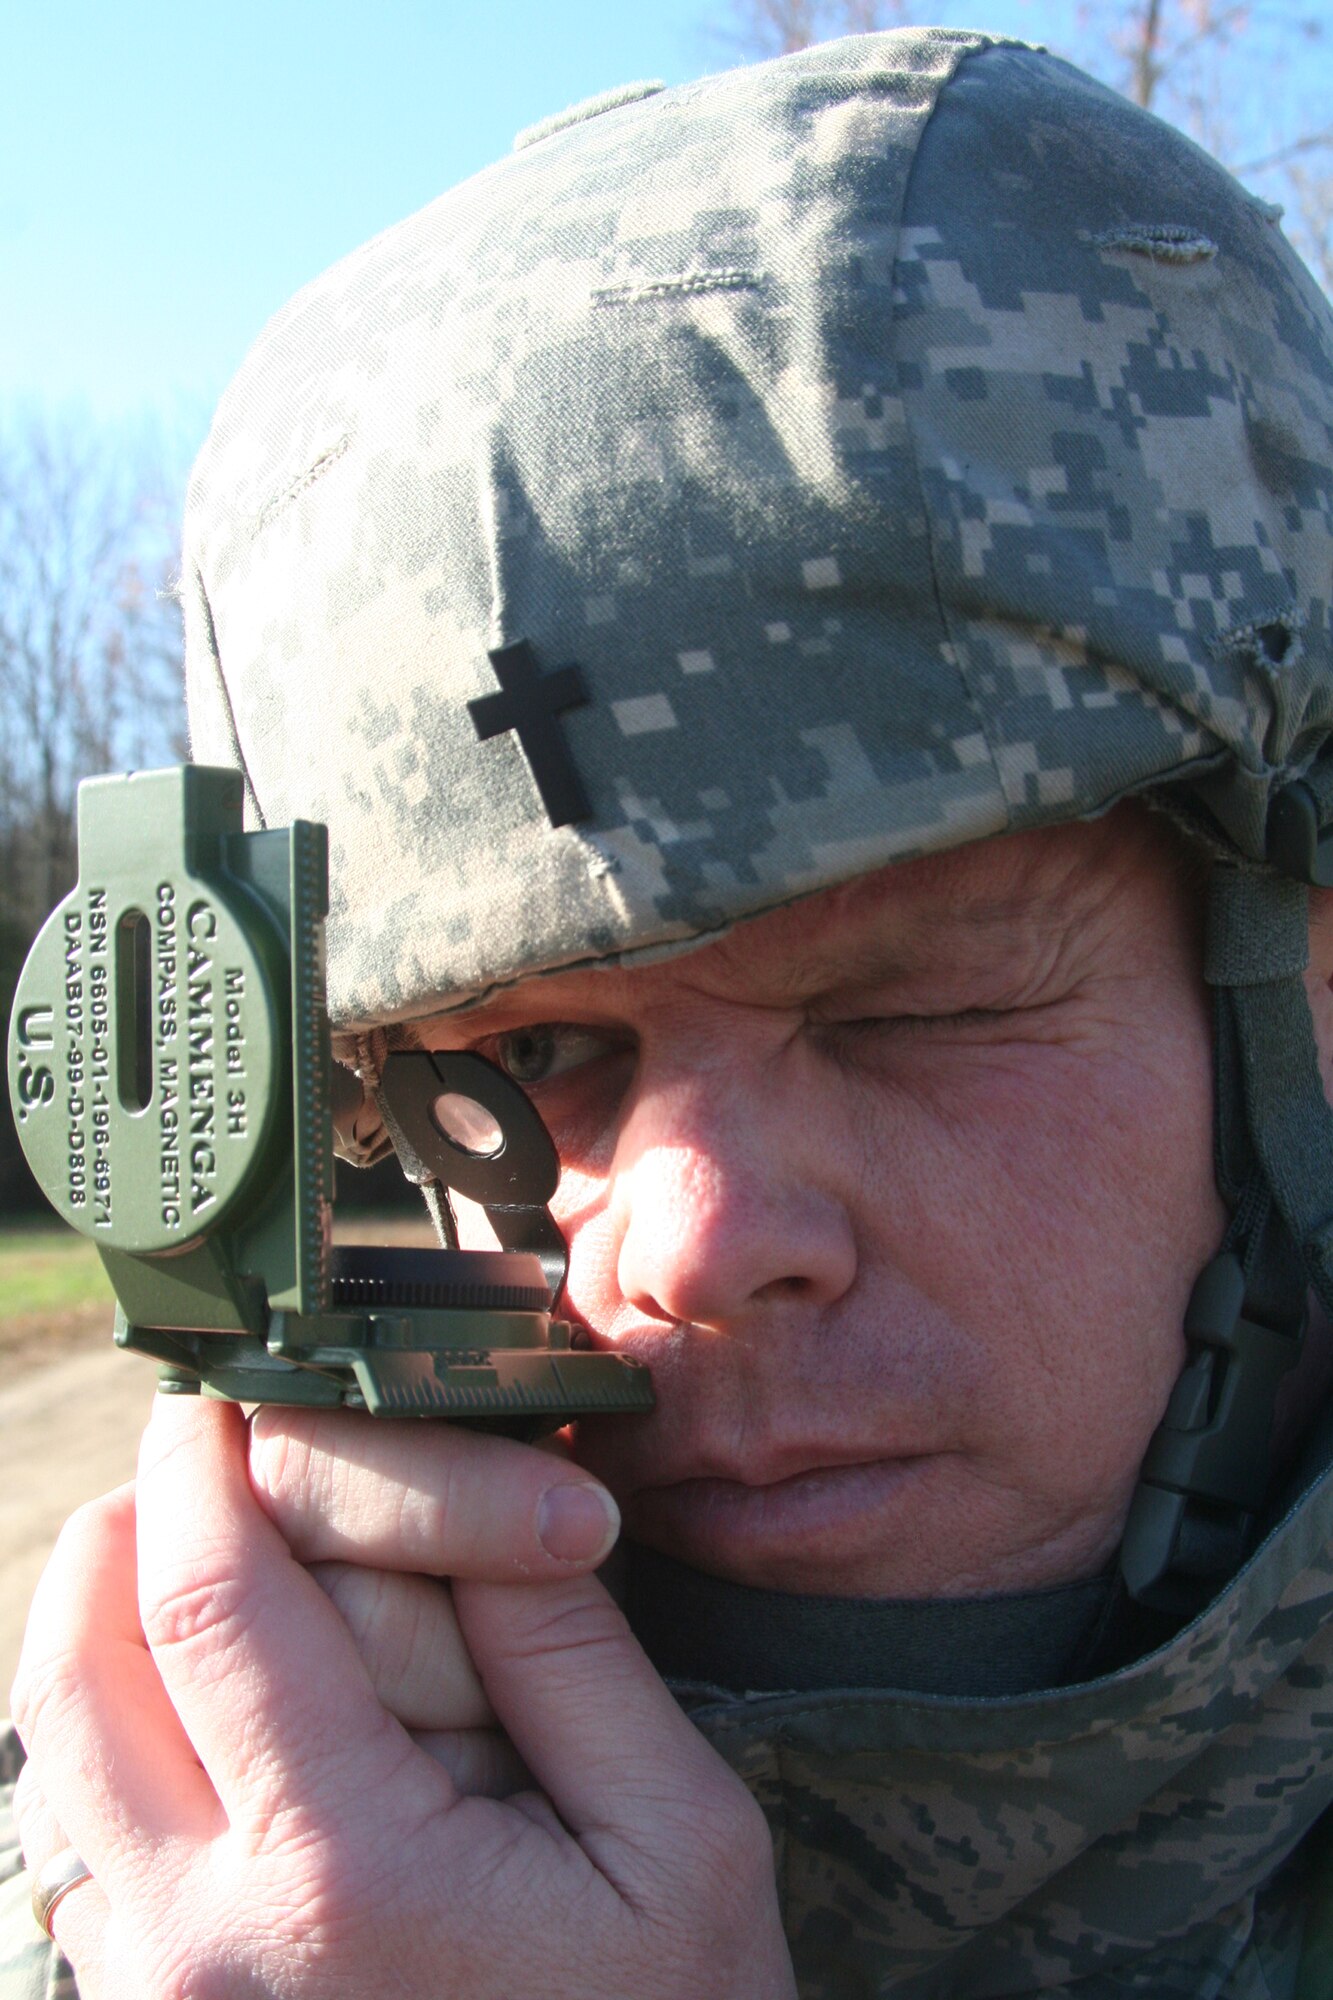 Chaplain (Capt.) Steve Fisher, from the 3rd Wing at Elmendorf Air Force Base, Alaska, and a student in the Combat Airman Skills Training Course 10-1A, taught by the U.S. Air Force Expeditionary Center's 421st Combat Training Squadron, uses a compass during a day of land navigation training in the course on a range at Joint Base McGuire-Dix-Lakehurst, N.J., on Nov. 6, 2009.  The course prepares Airmen for upcoming deployments.  (U.S. Air Force Photo/Tech. Sgt. Scott T. Sturkol)